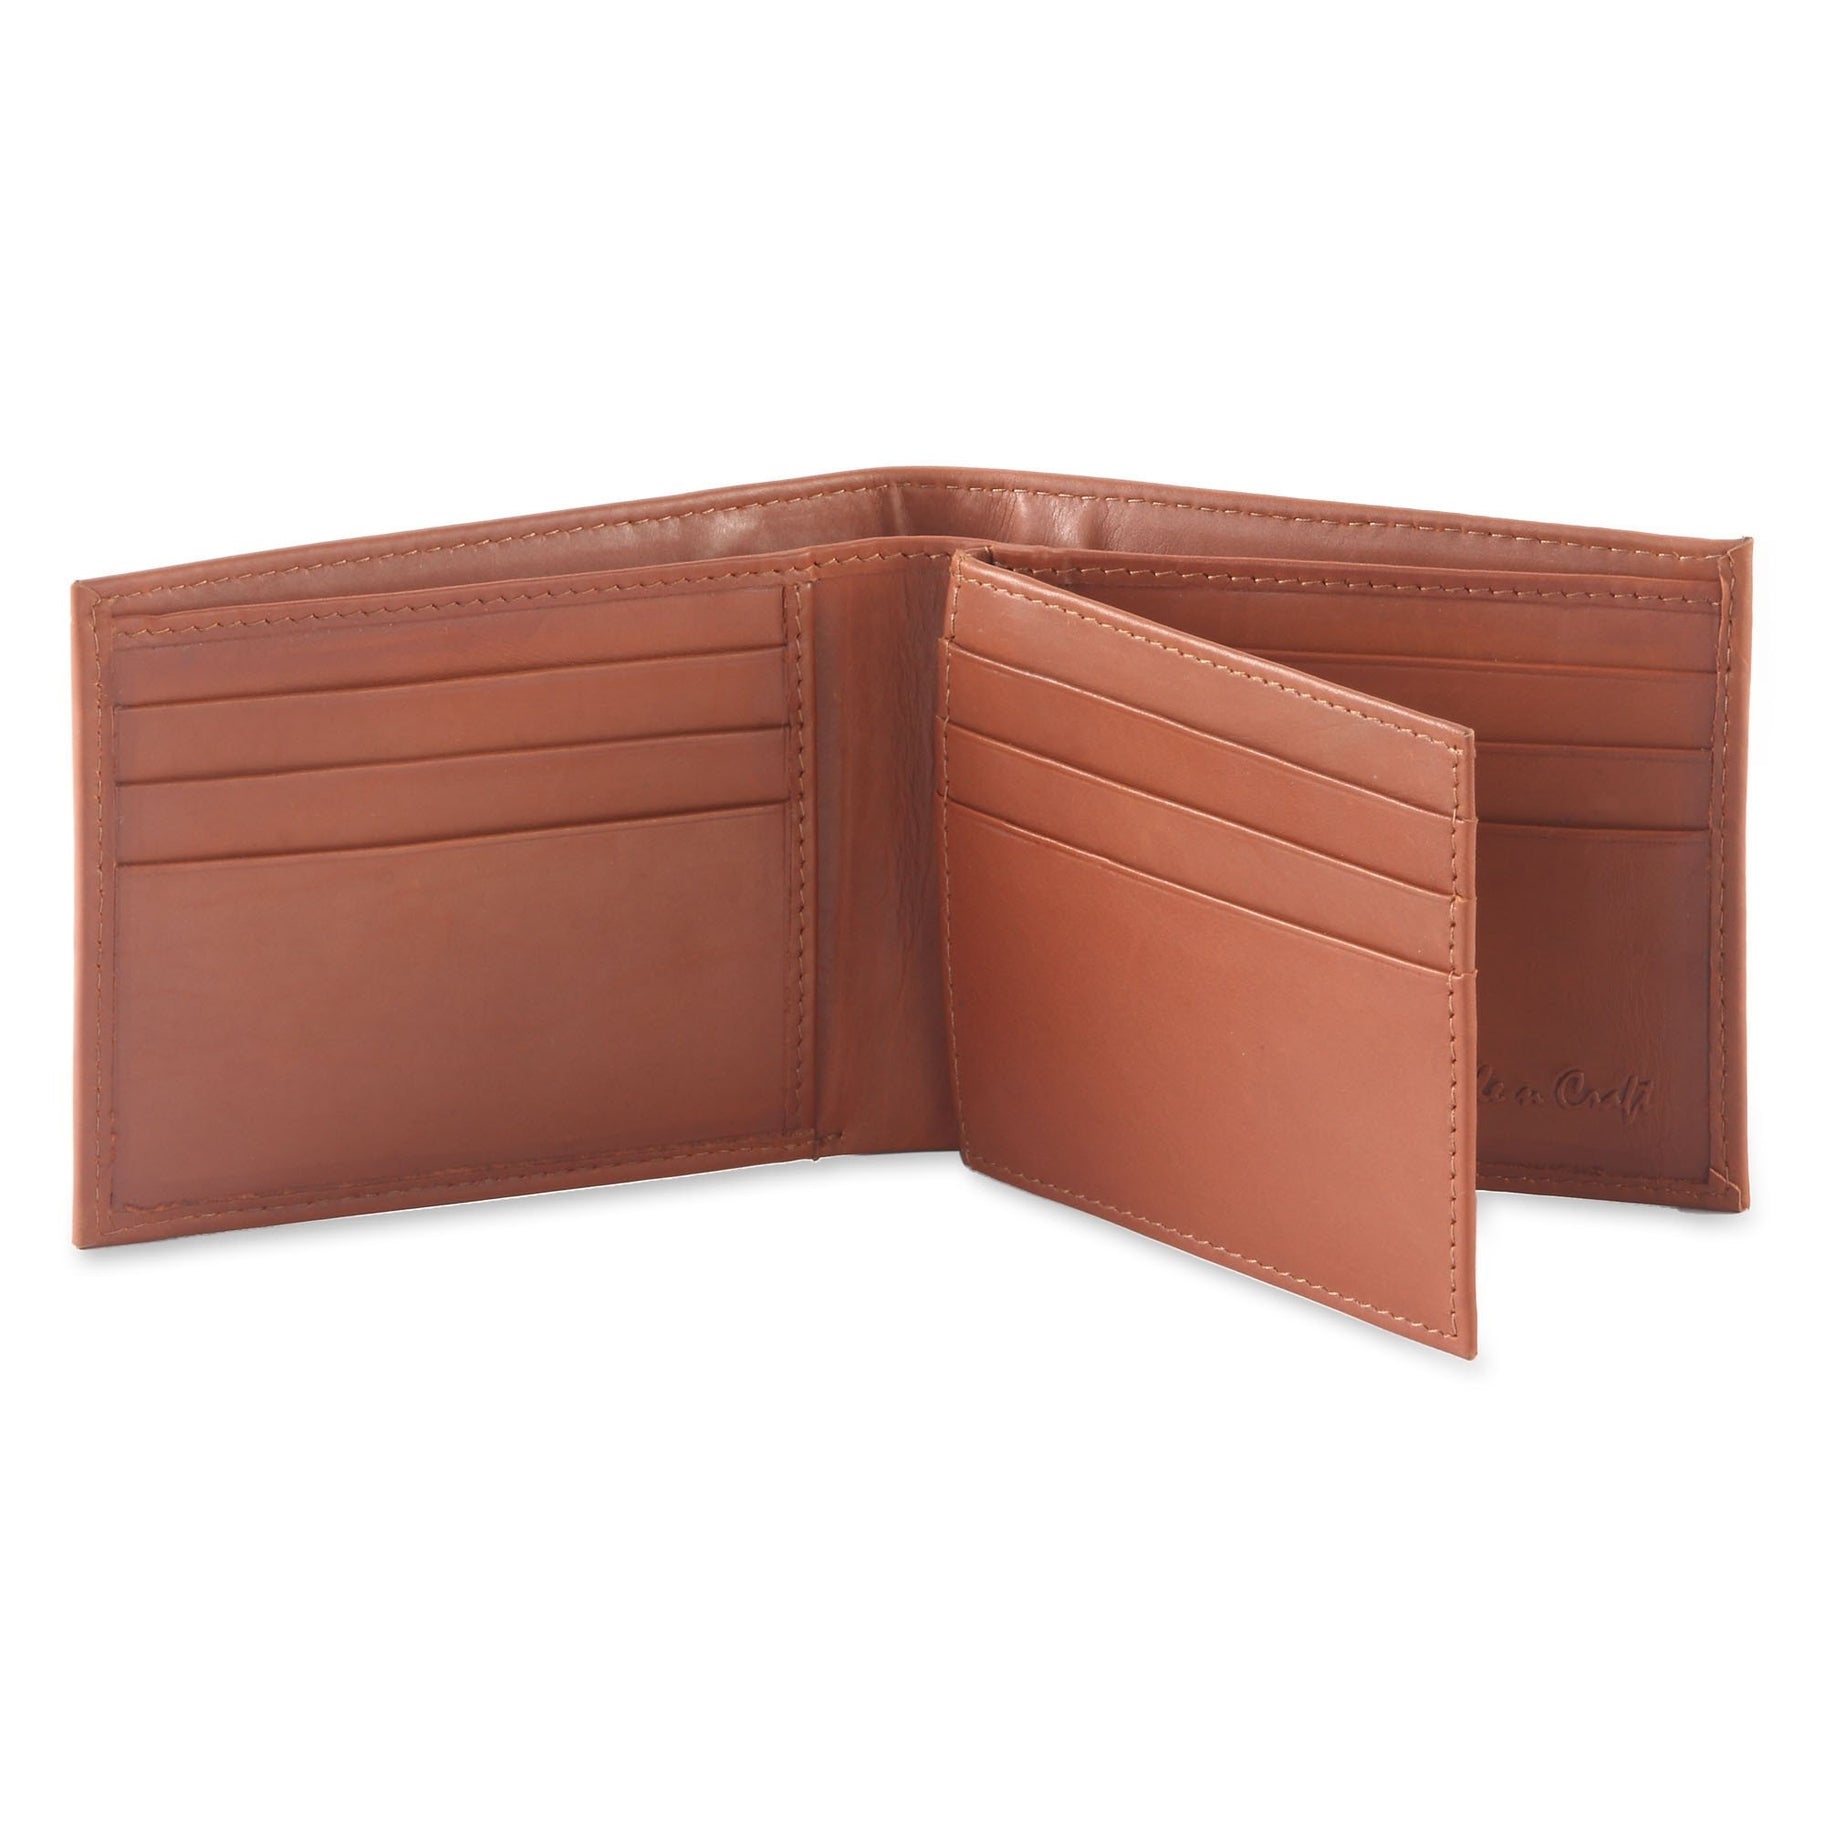 Bifold Leather Wallet with Center Flap in Tan